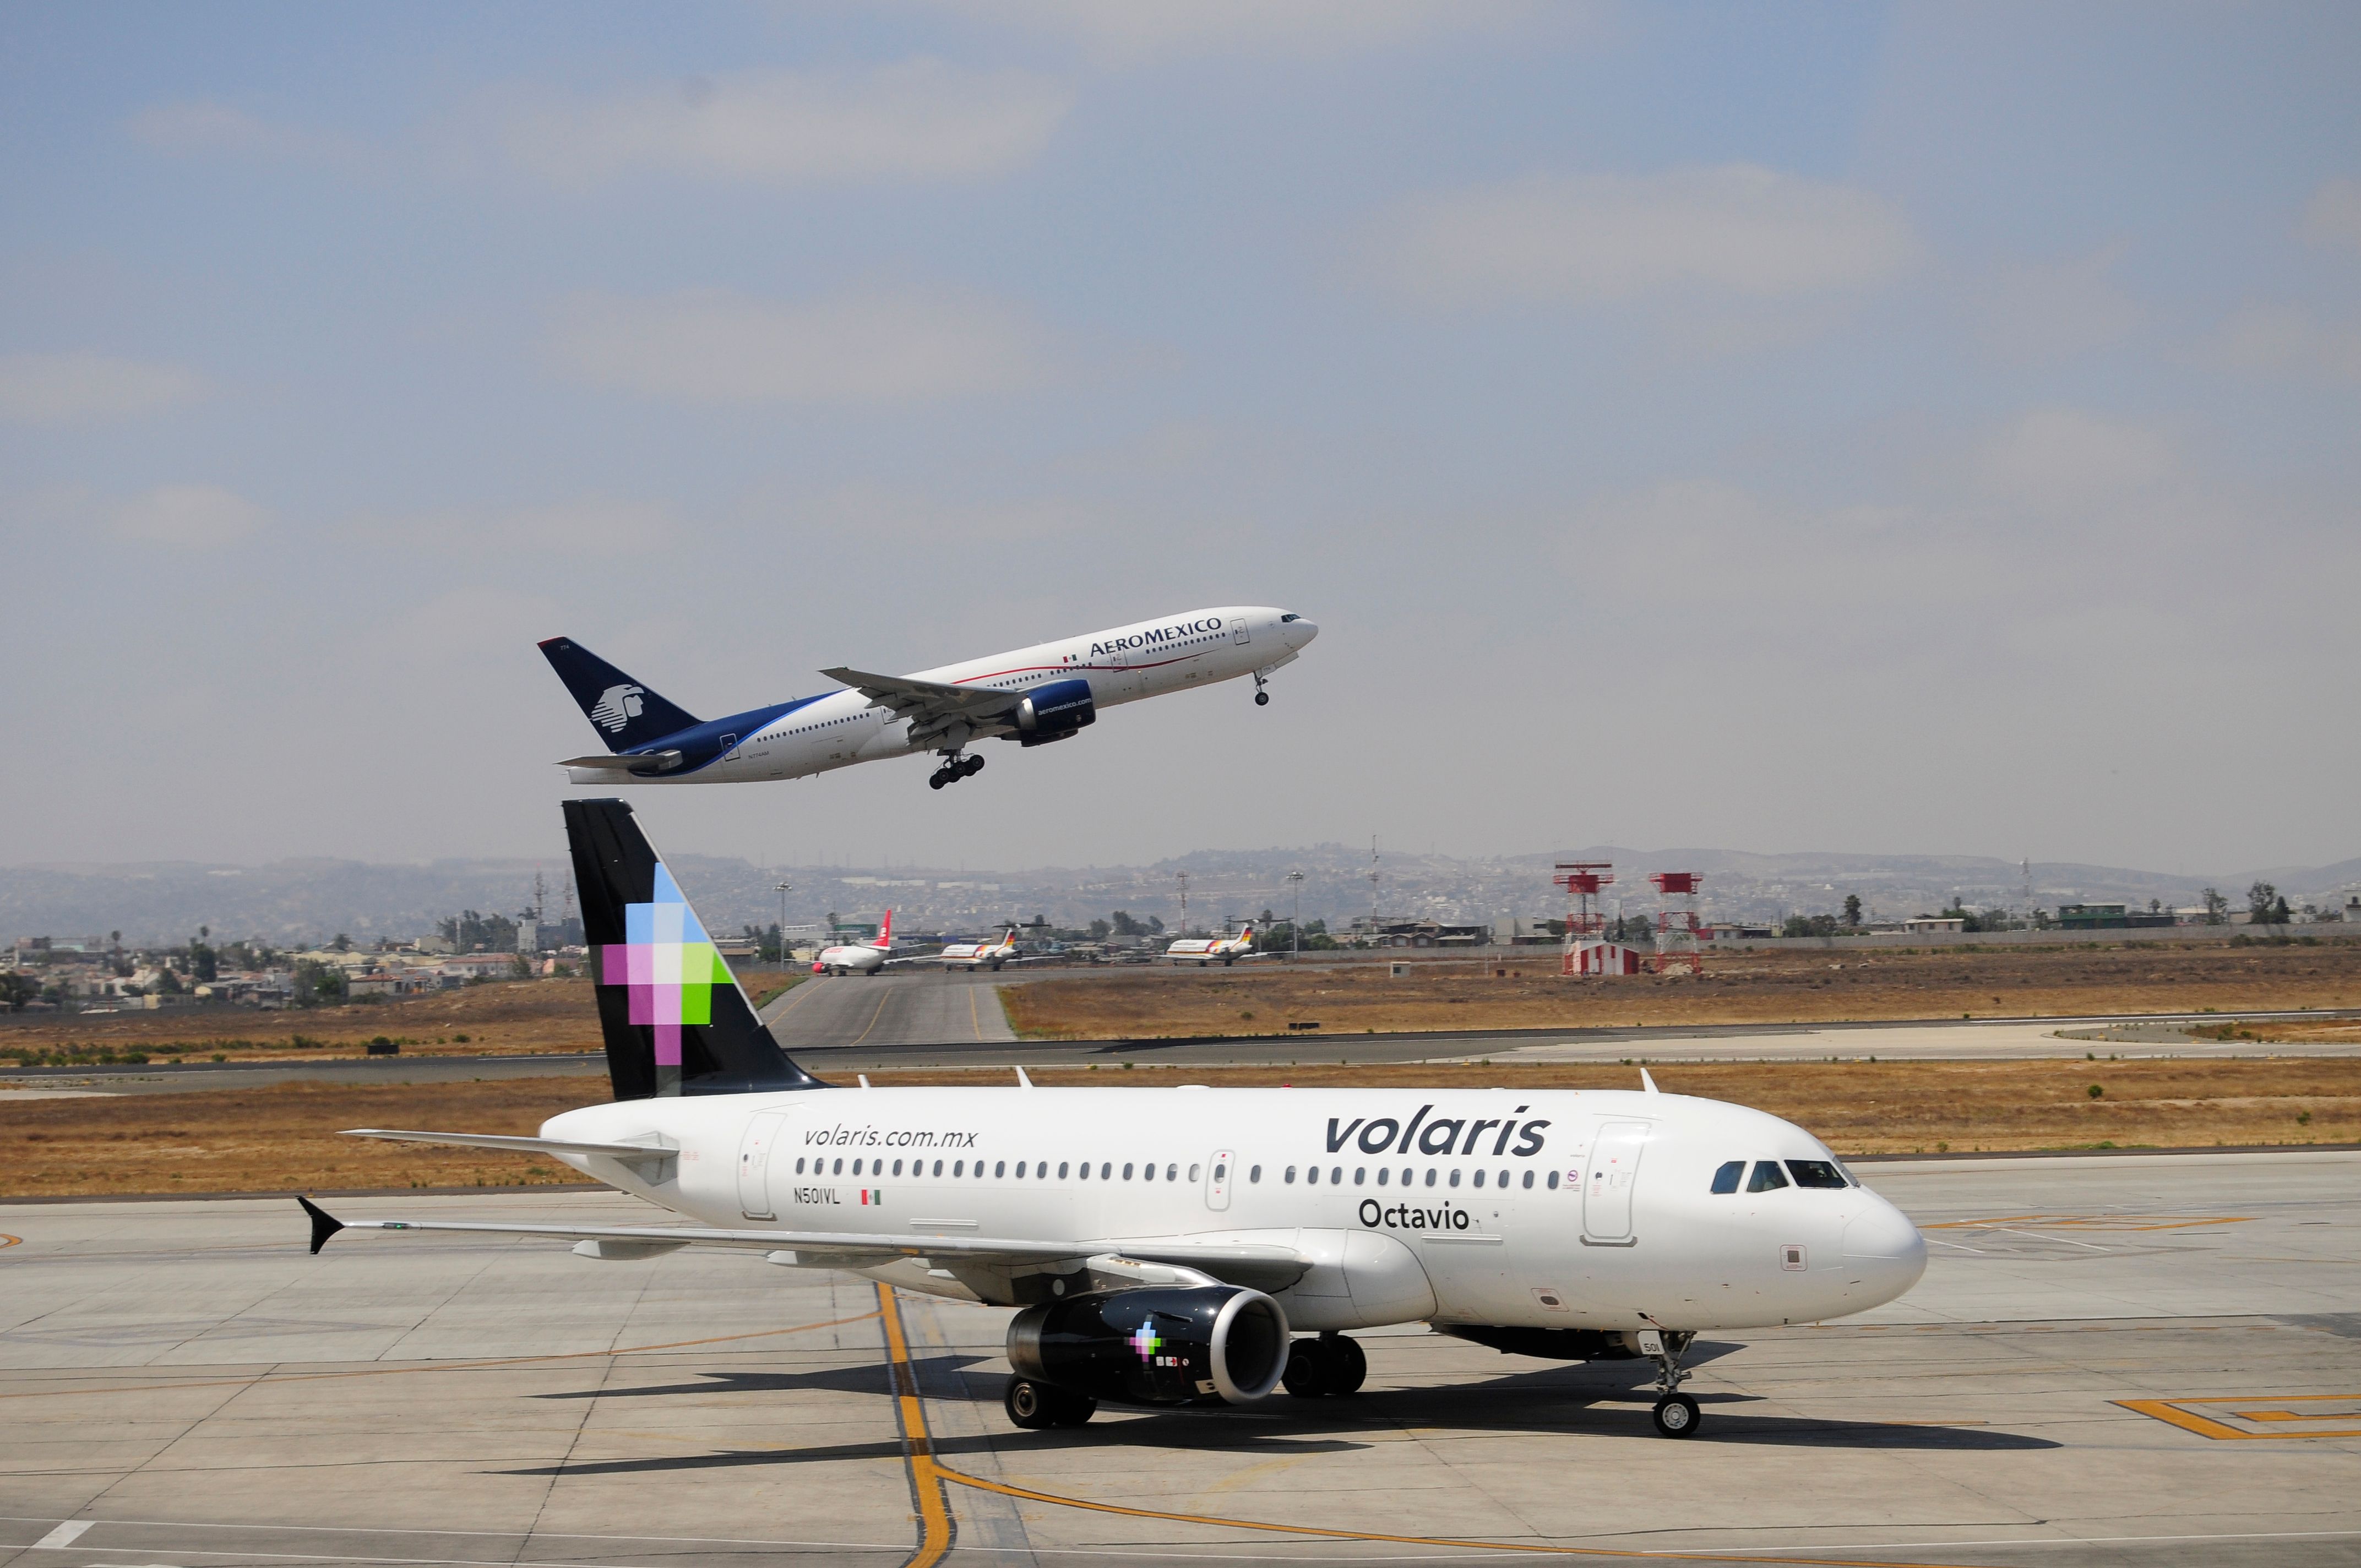 Volaris airline (on Land) and Aeromexico Airlines depart; both mexicans aircrafts in the Tijuana international airport.